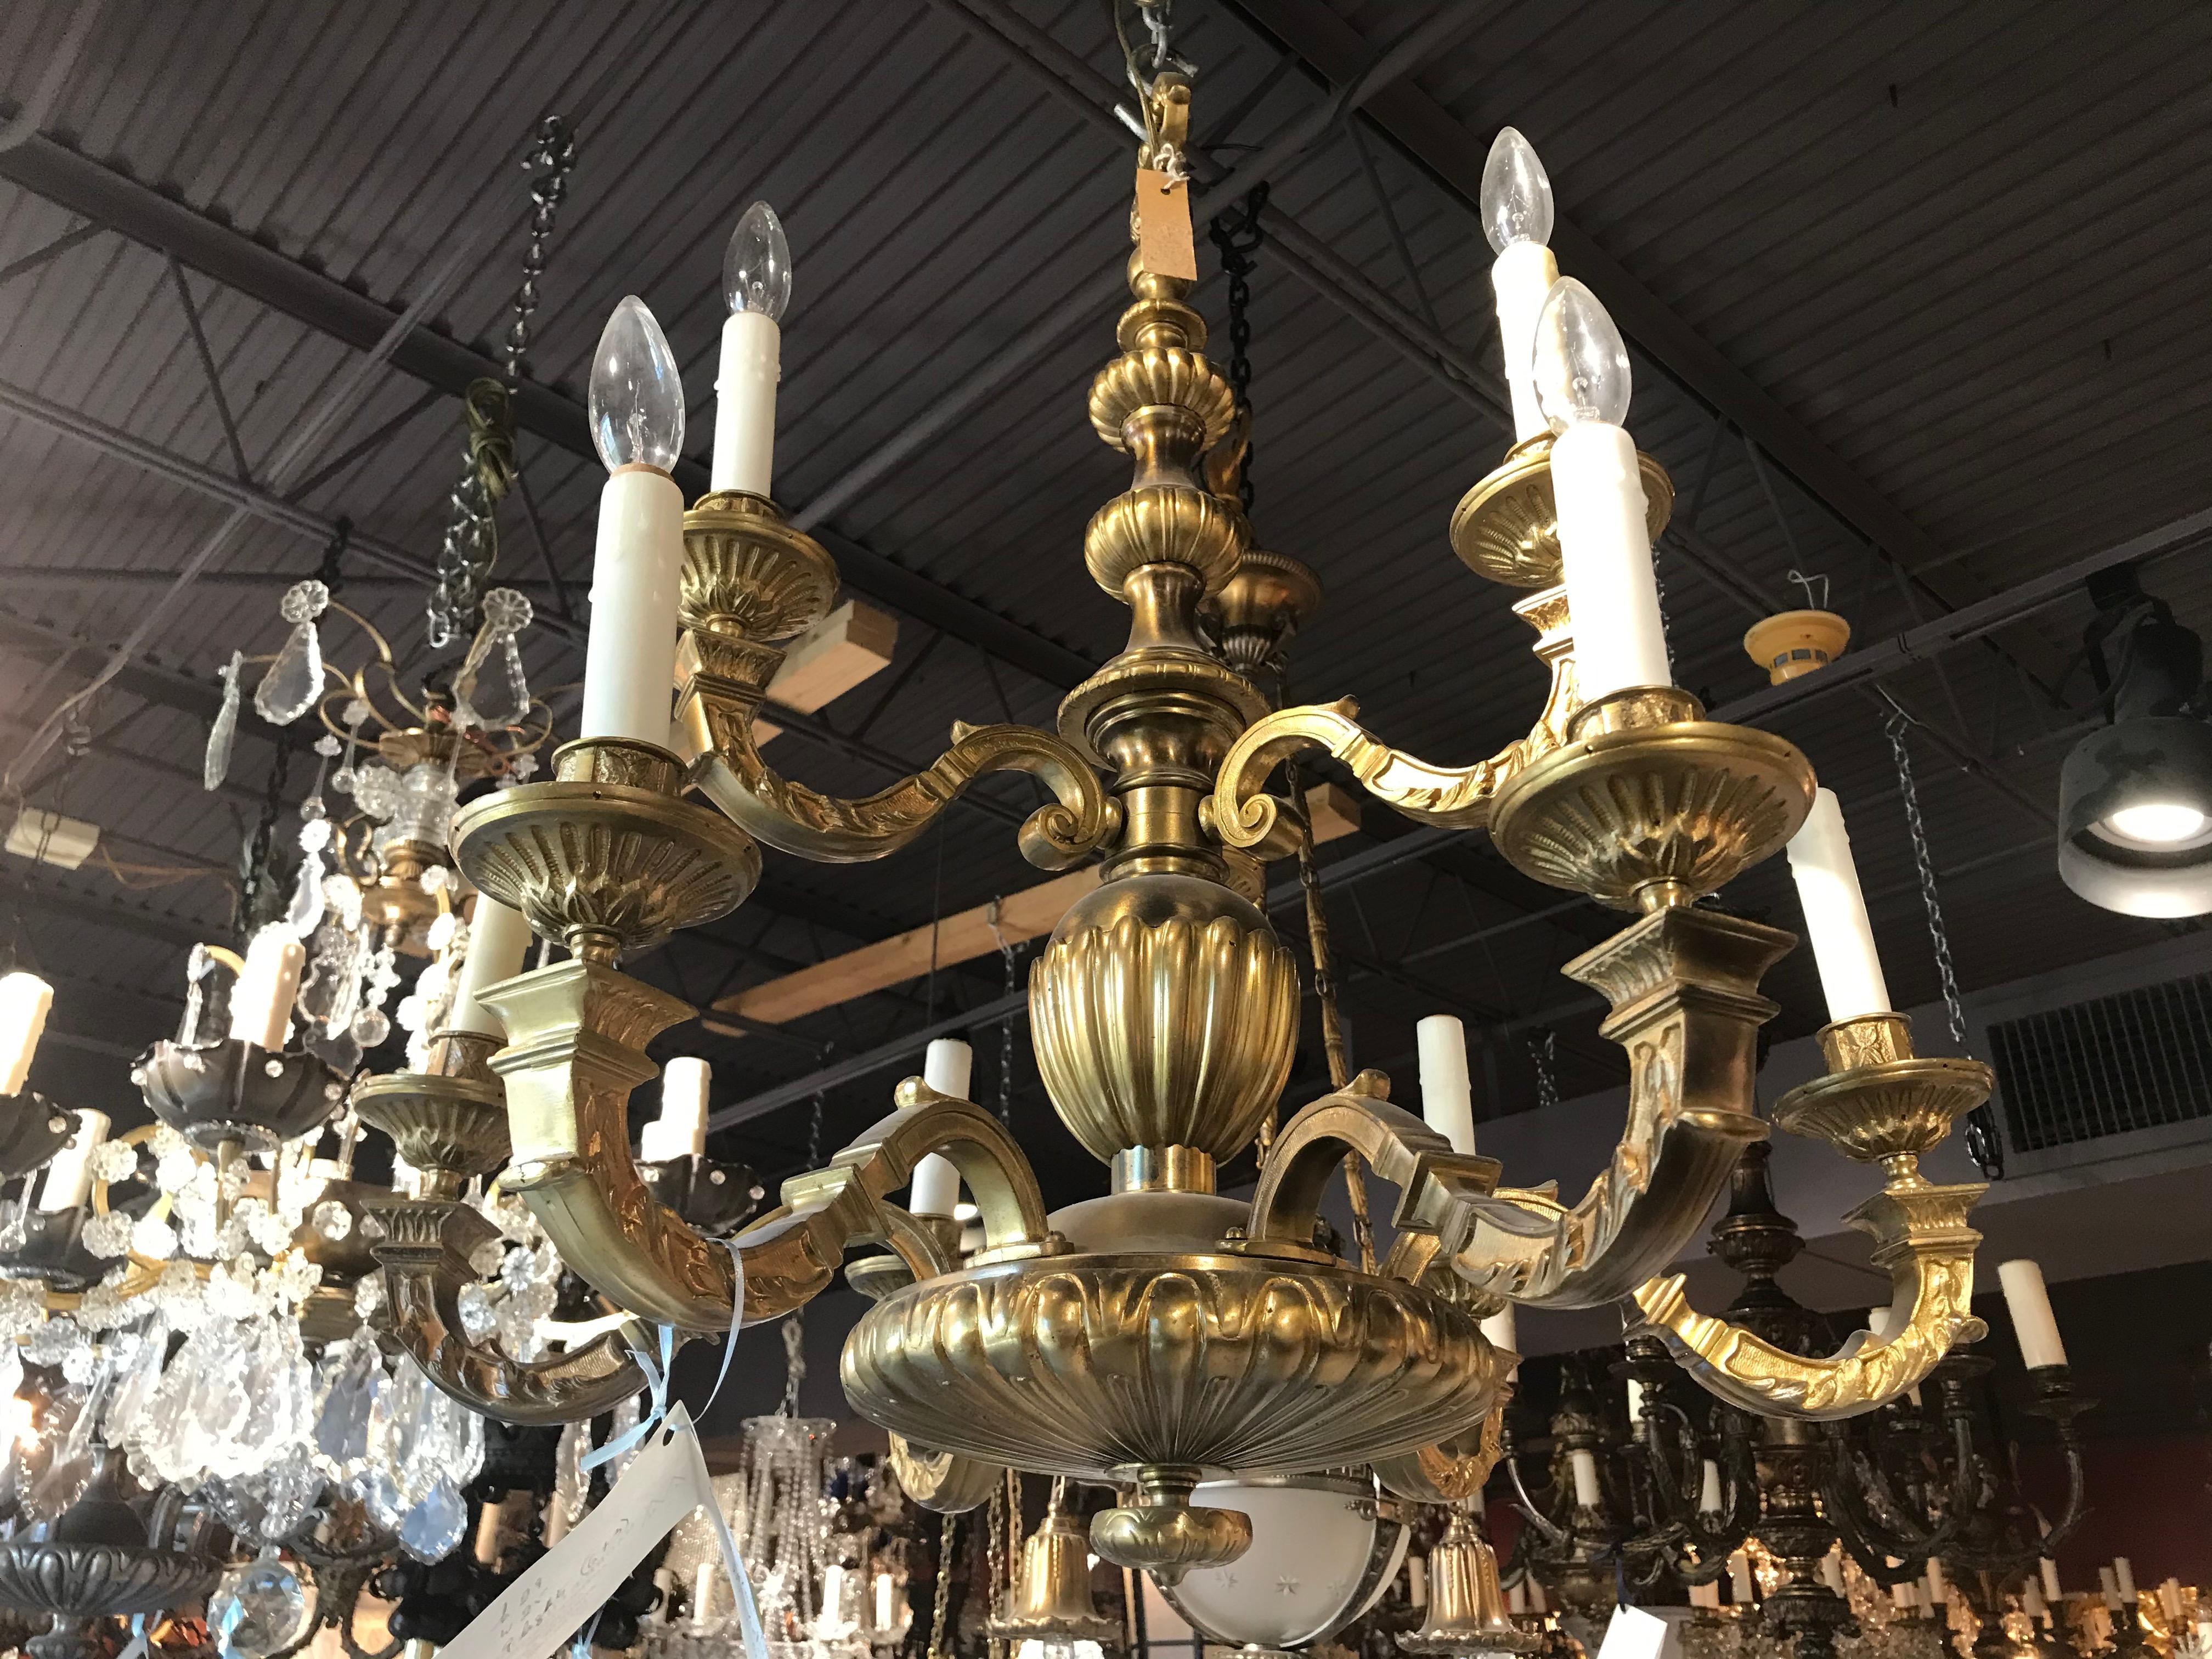 A very fine gilt bronze chandelier. 9-light (6 on bottom + 3 on top)
France, circa 1900
Dimensions: Height 29